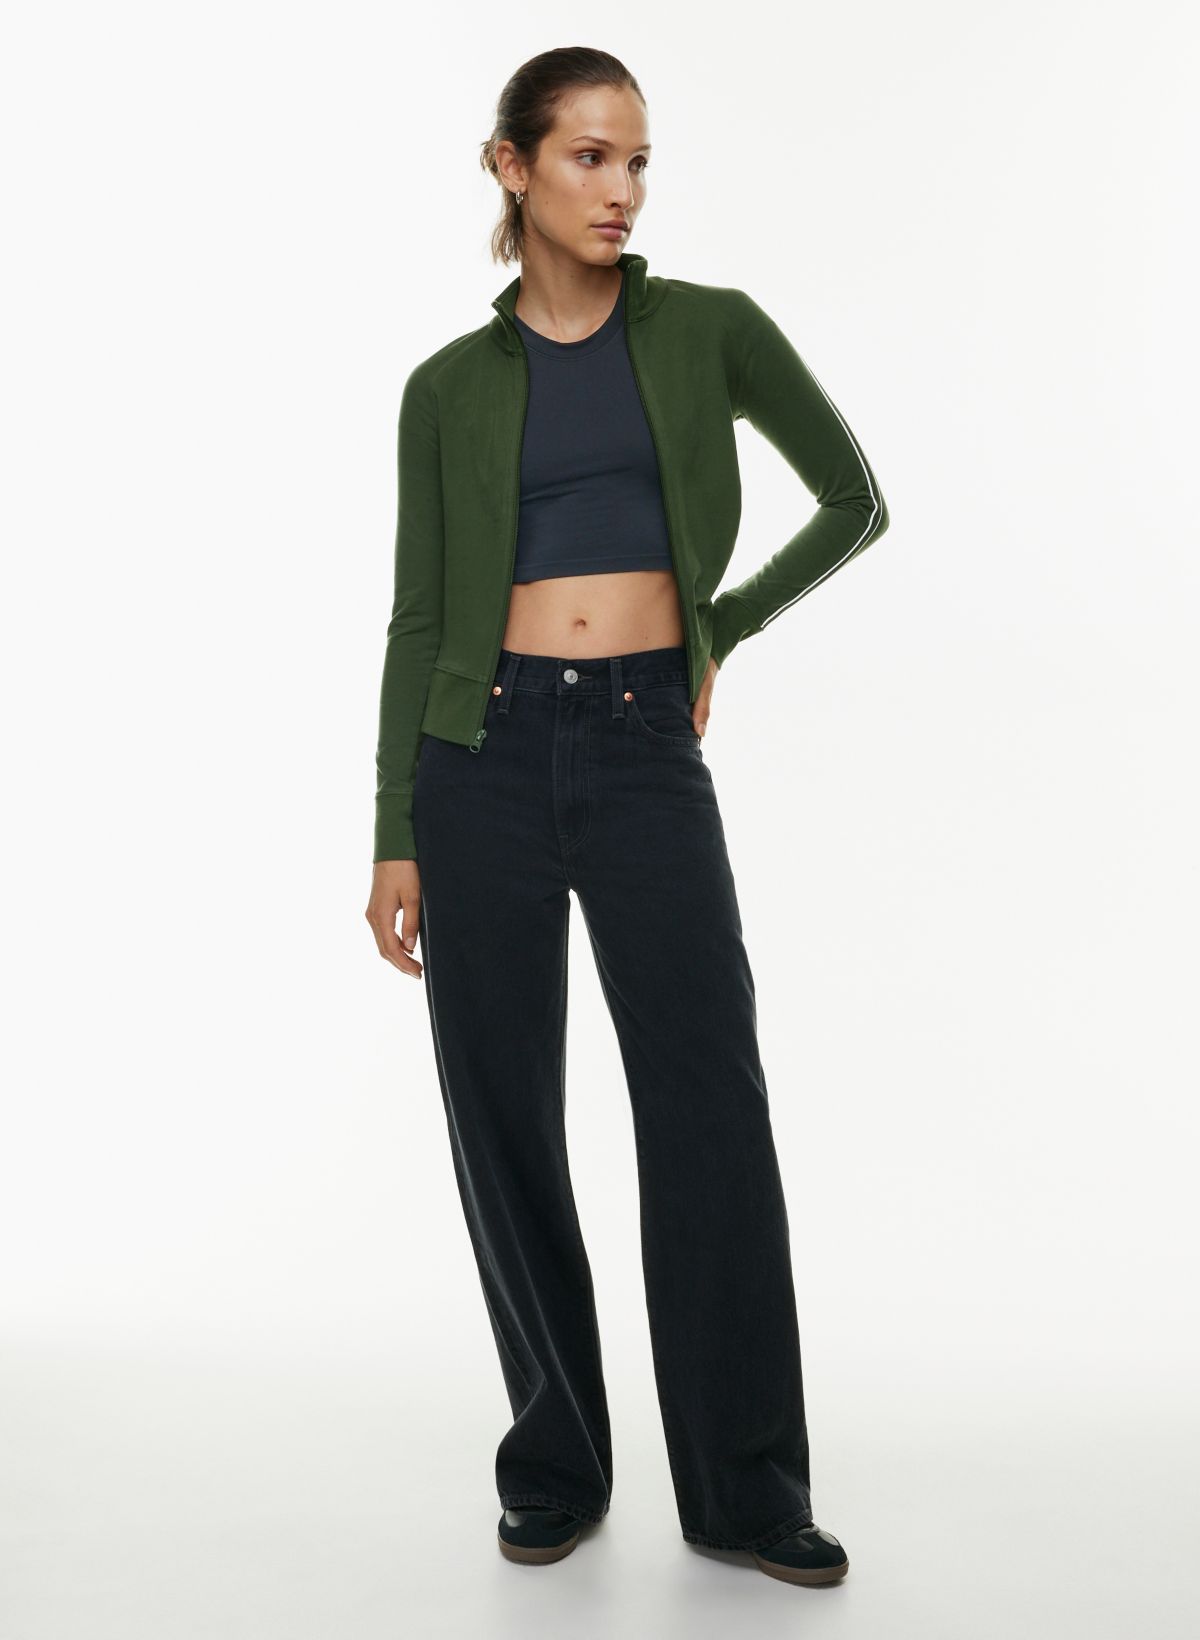 Levi's - Made to flatter, our Ribcage Wide Leg Jeans have